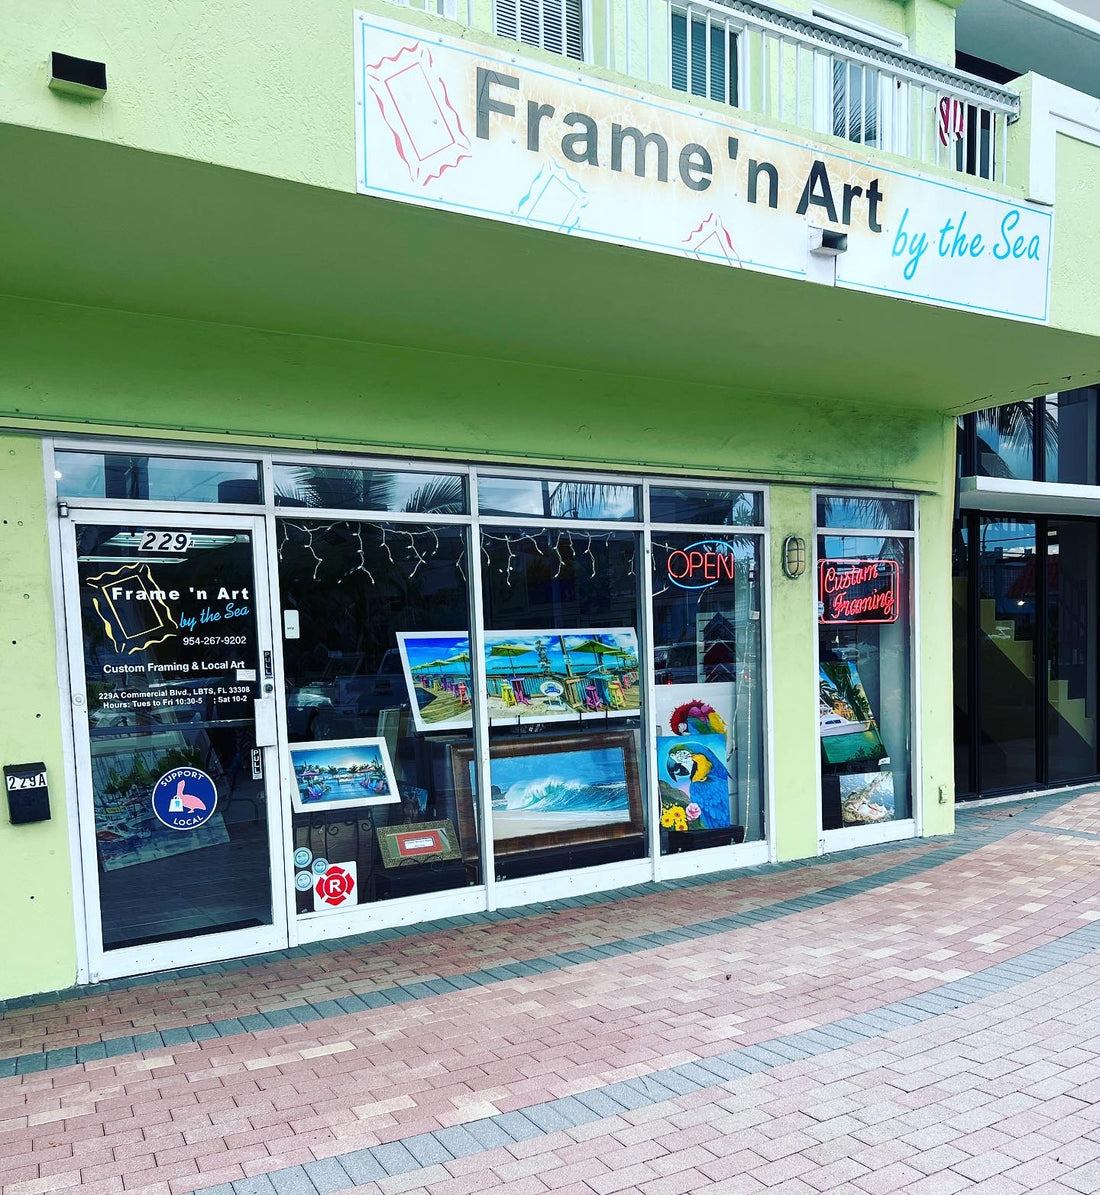 Frame' n Art by the Sea is Now Featuring Viktor's Latest Artwork